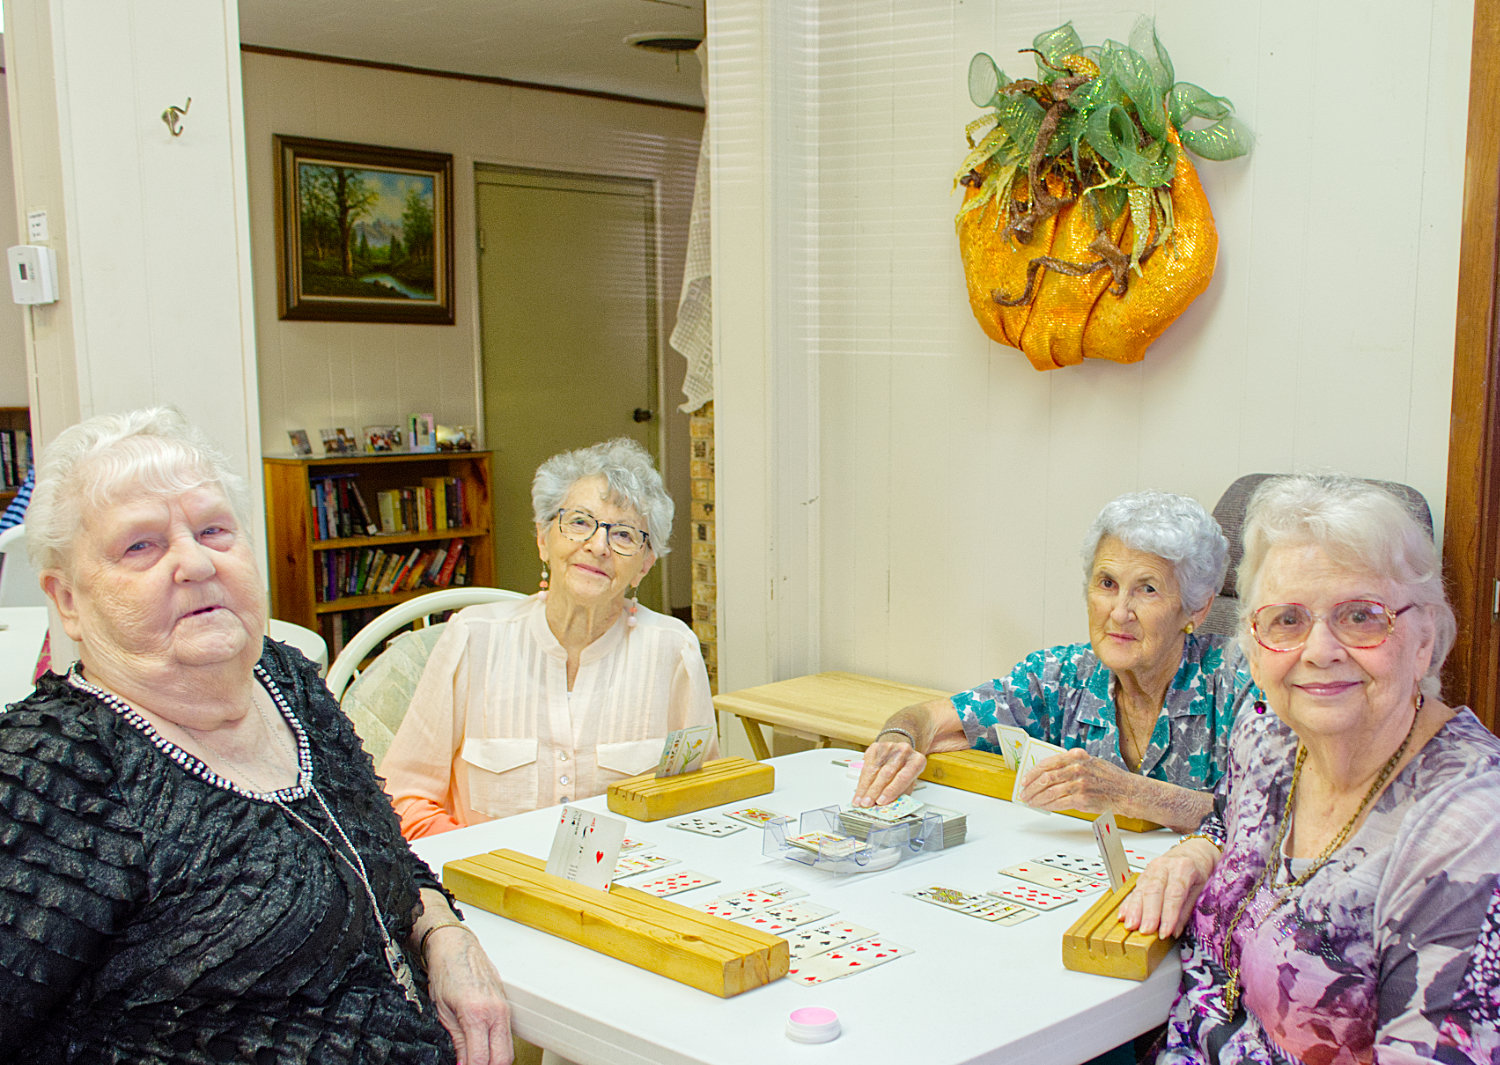 Ella Mae Clifton, (from left) Jeanette Treadaway, Sonja Vaughn and Linda Morgan meet at the Mineola Senior Citizen Center almost daily to play cards together. The center offers them fellowship and a place to connect.